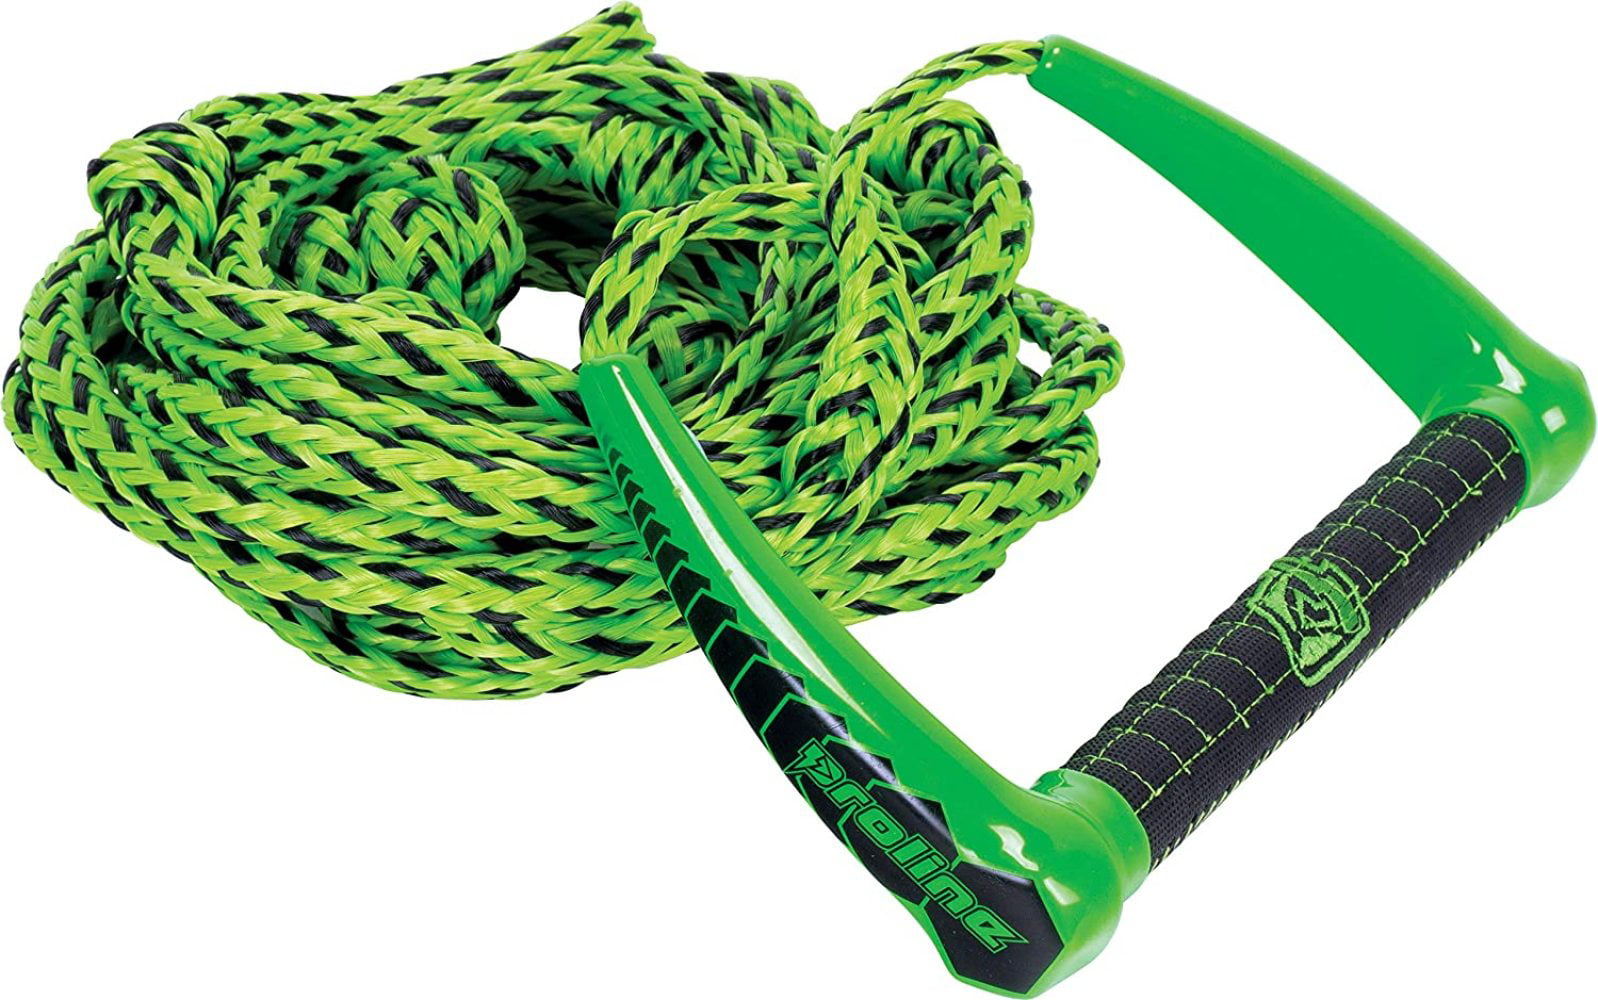 CWB Proline Tube Diameter Tube Tow Rope with Floats 